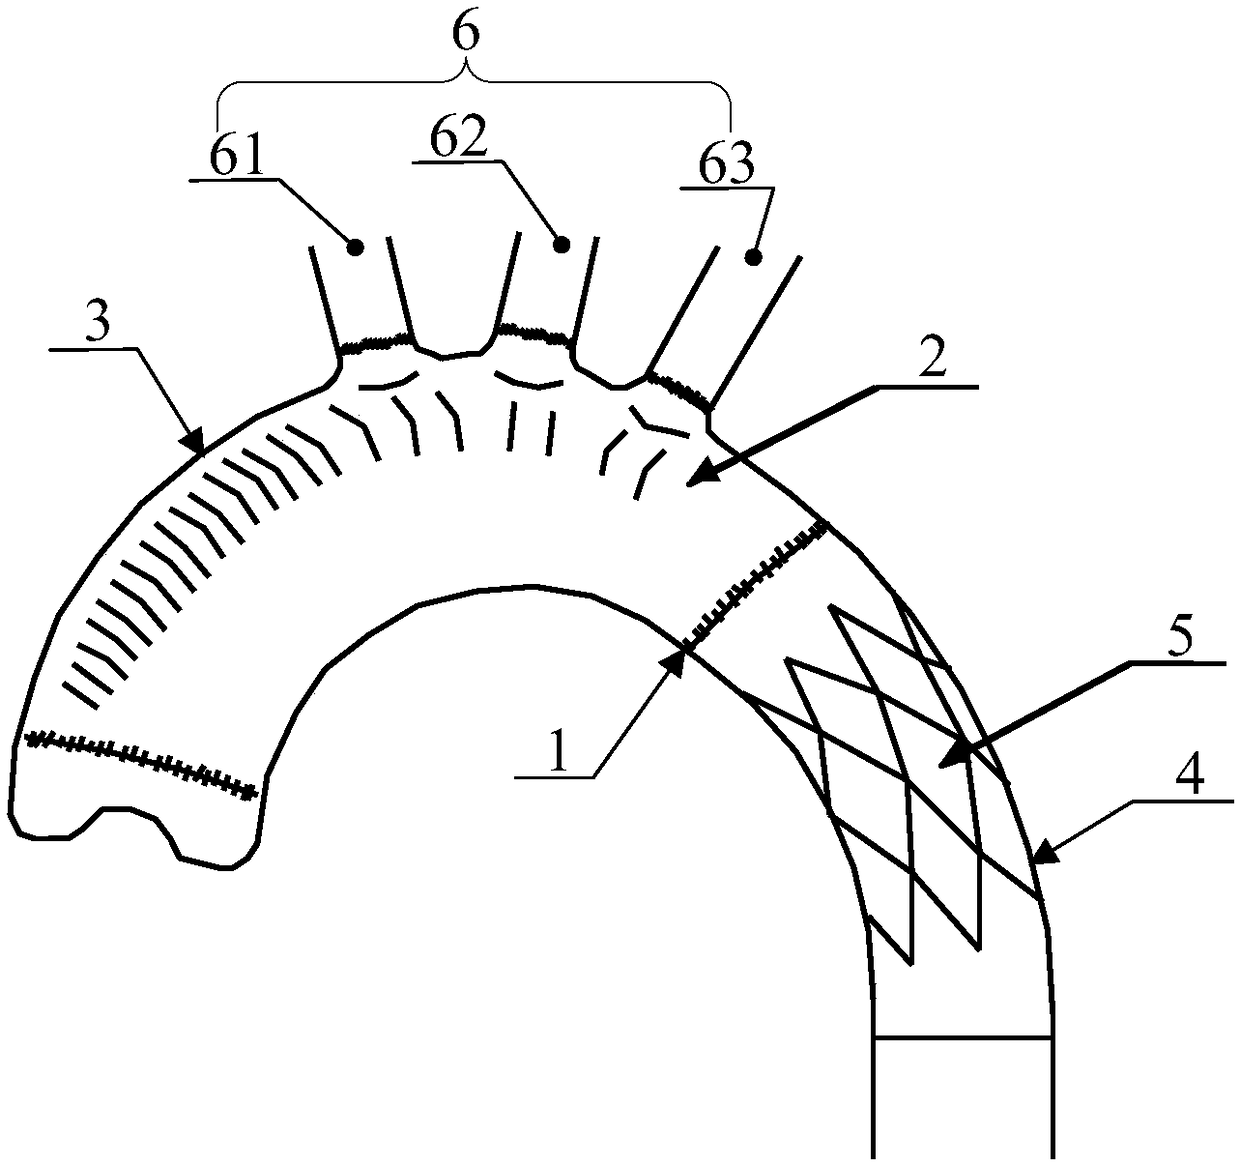 Intraoperative stent delivery system and intraoperative stent system